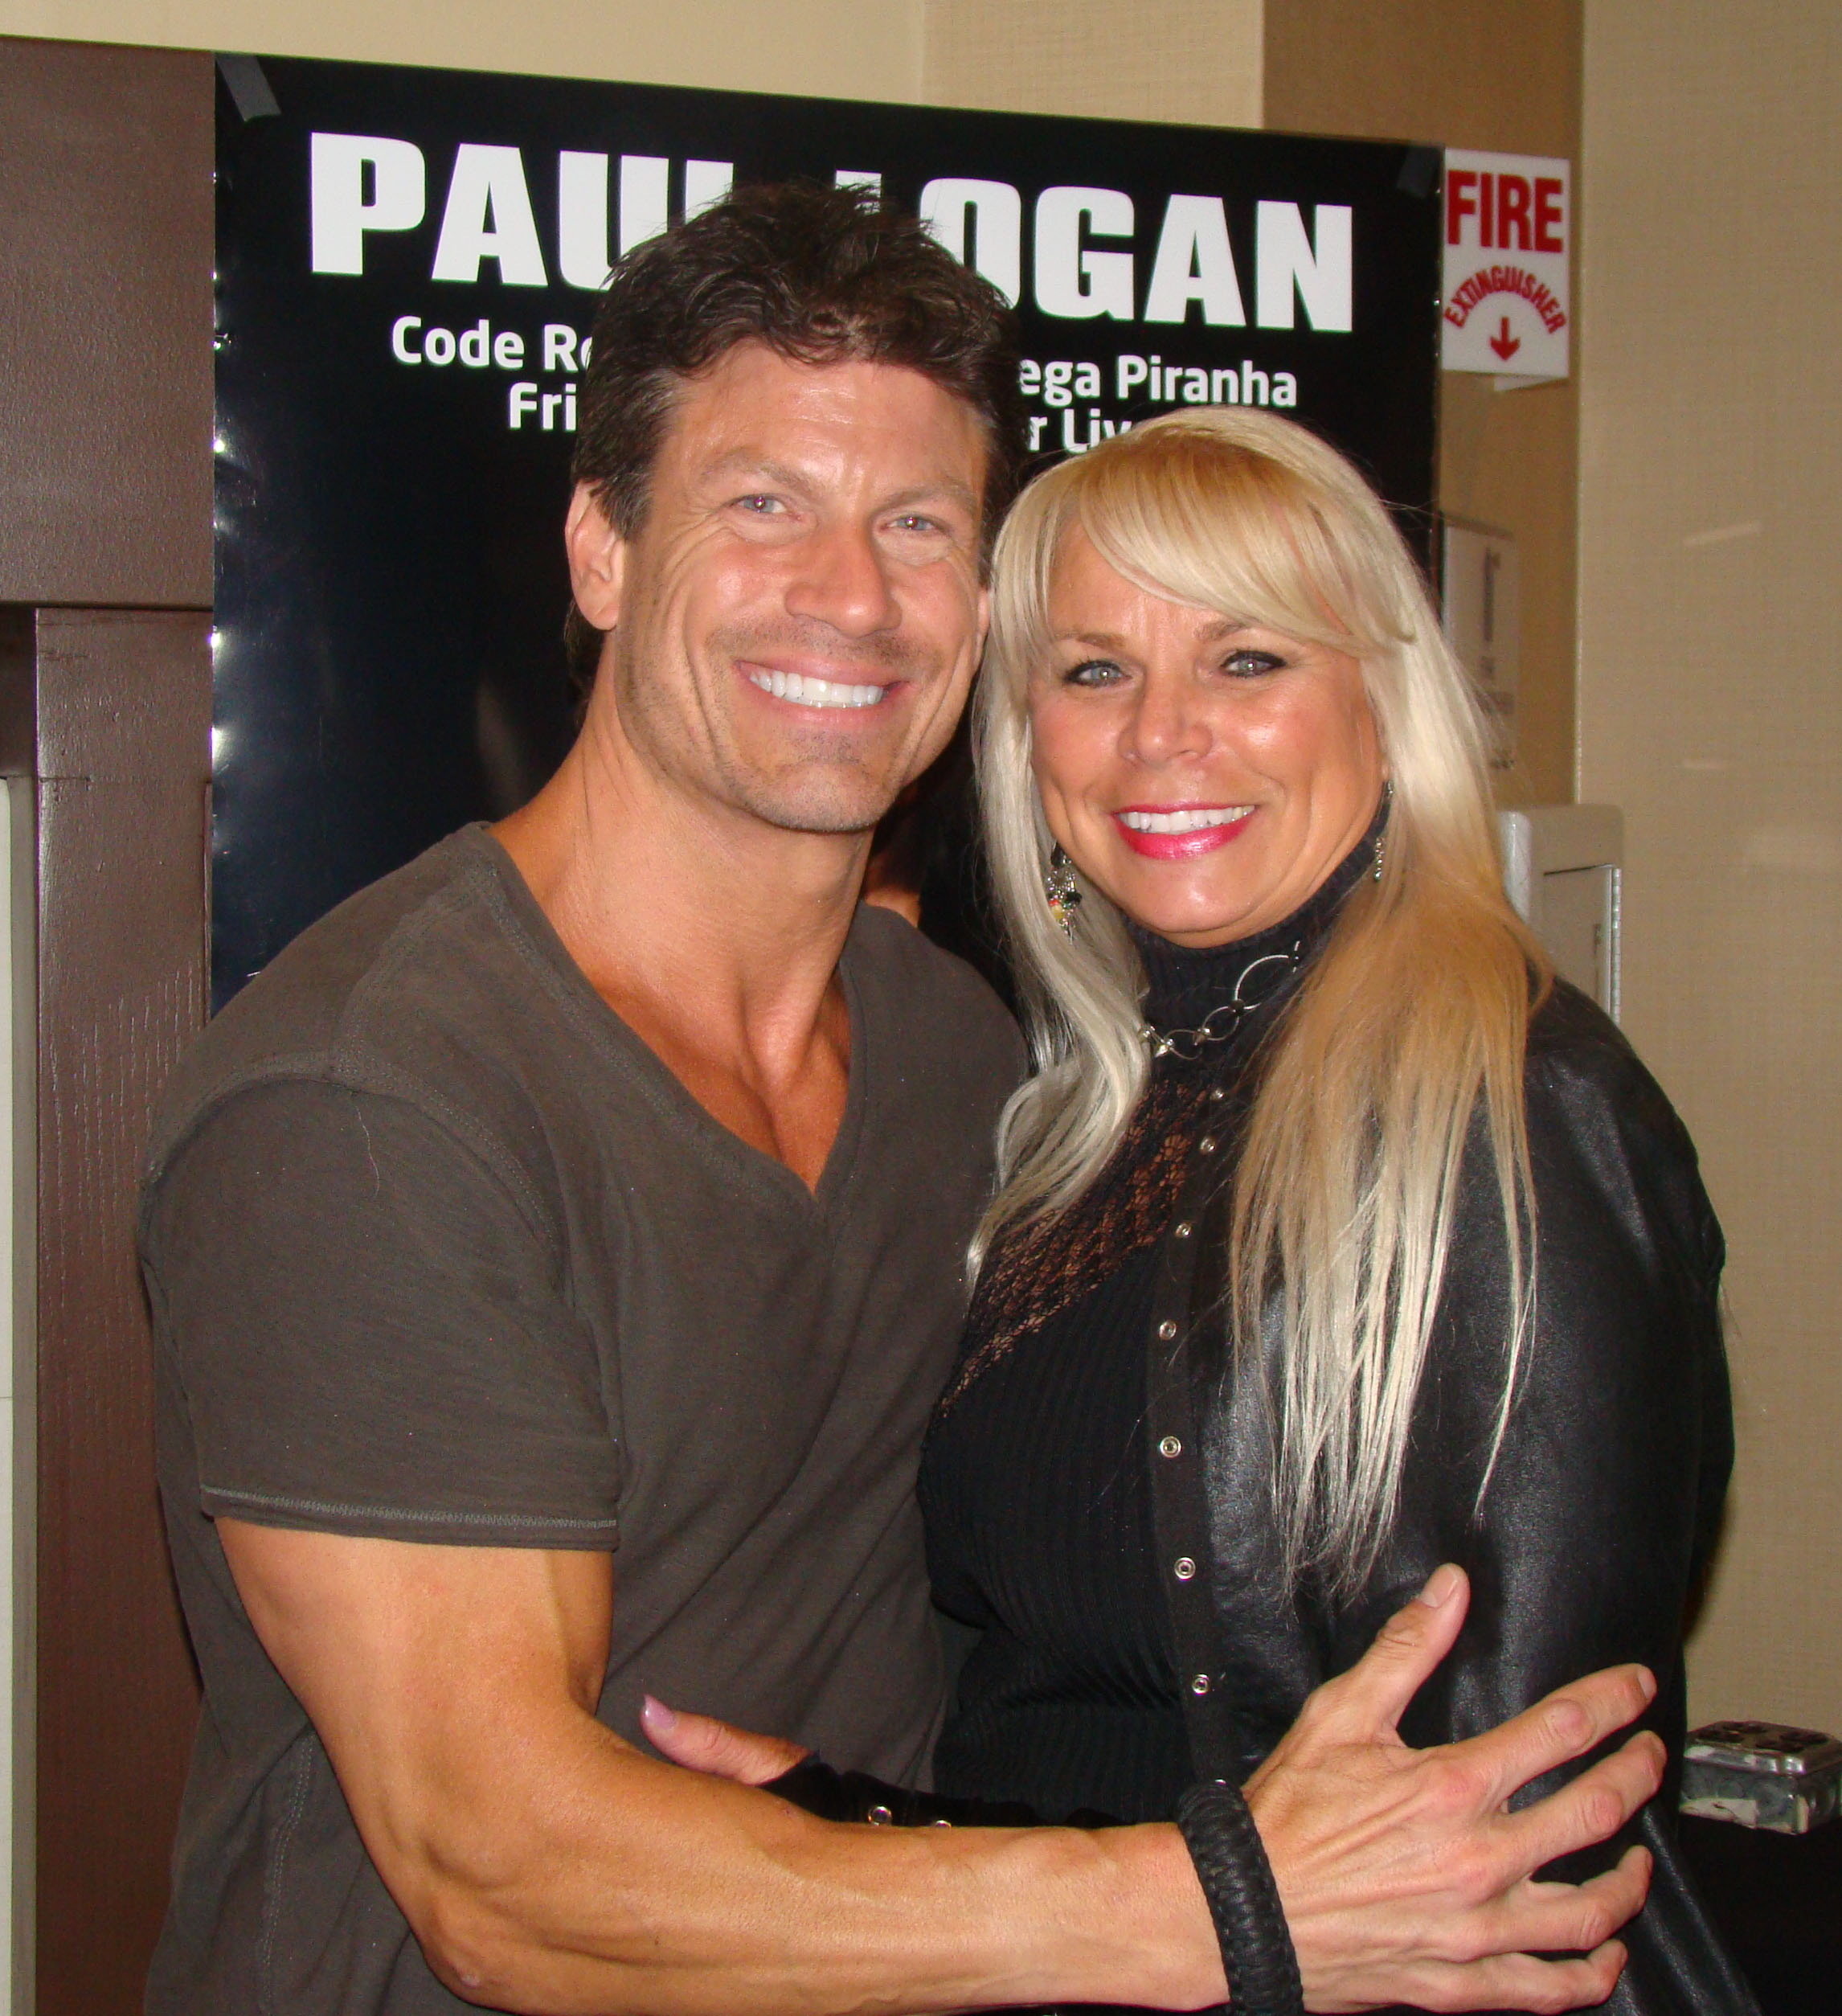 Paul Logan and Kadrolsha Ona Carole got along very well while doing their appearances at Chiller Theatre April 2014